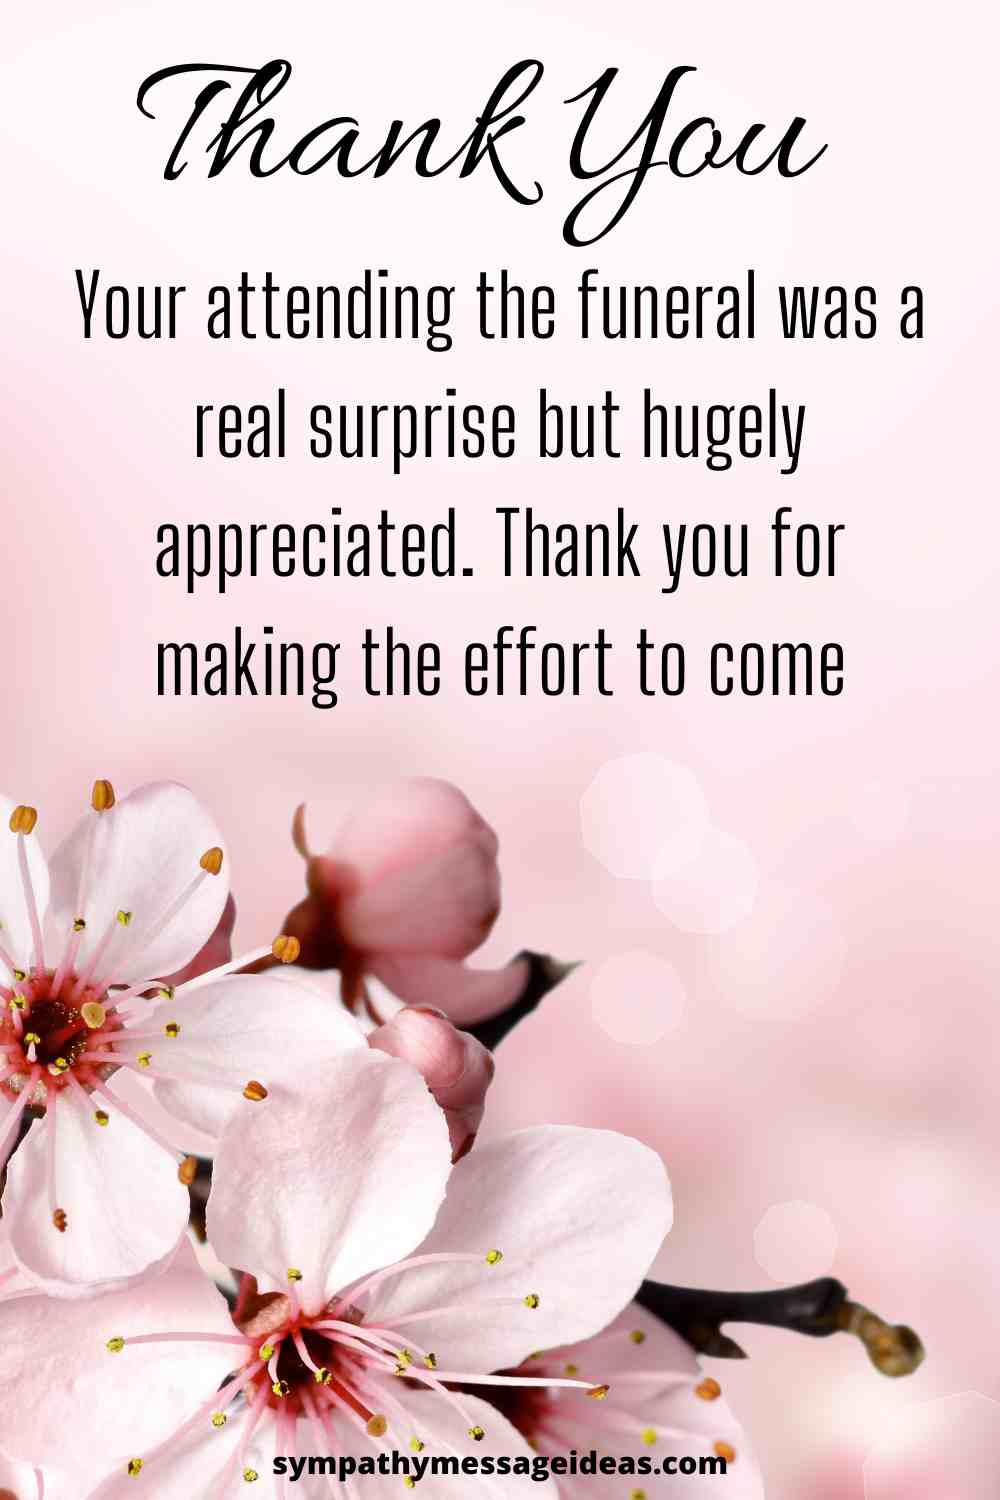 thank you to coworker for attending funeral